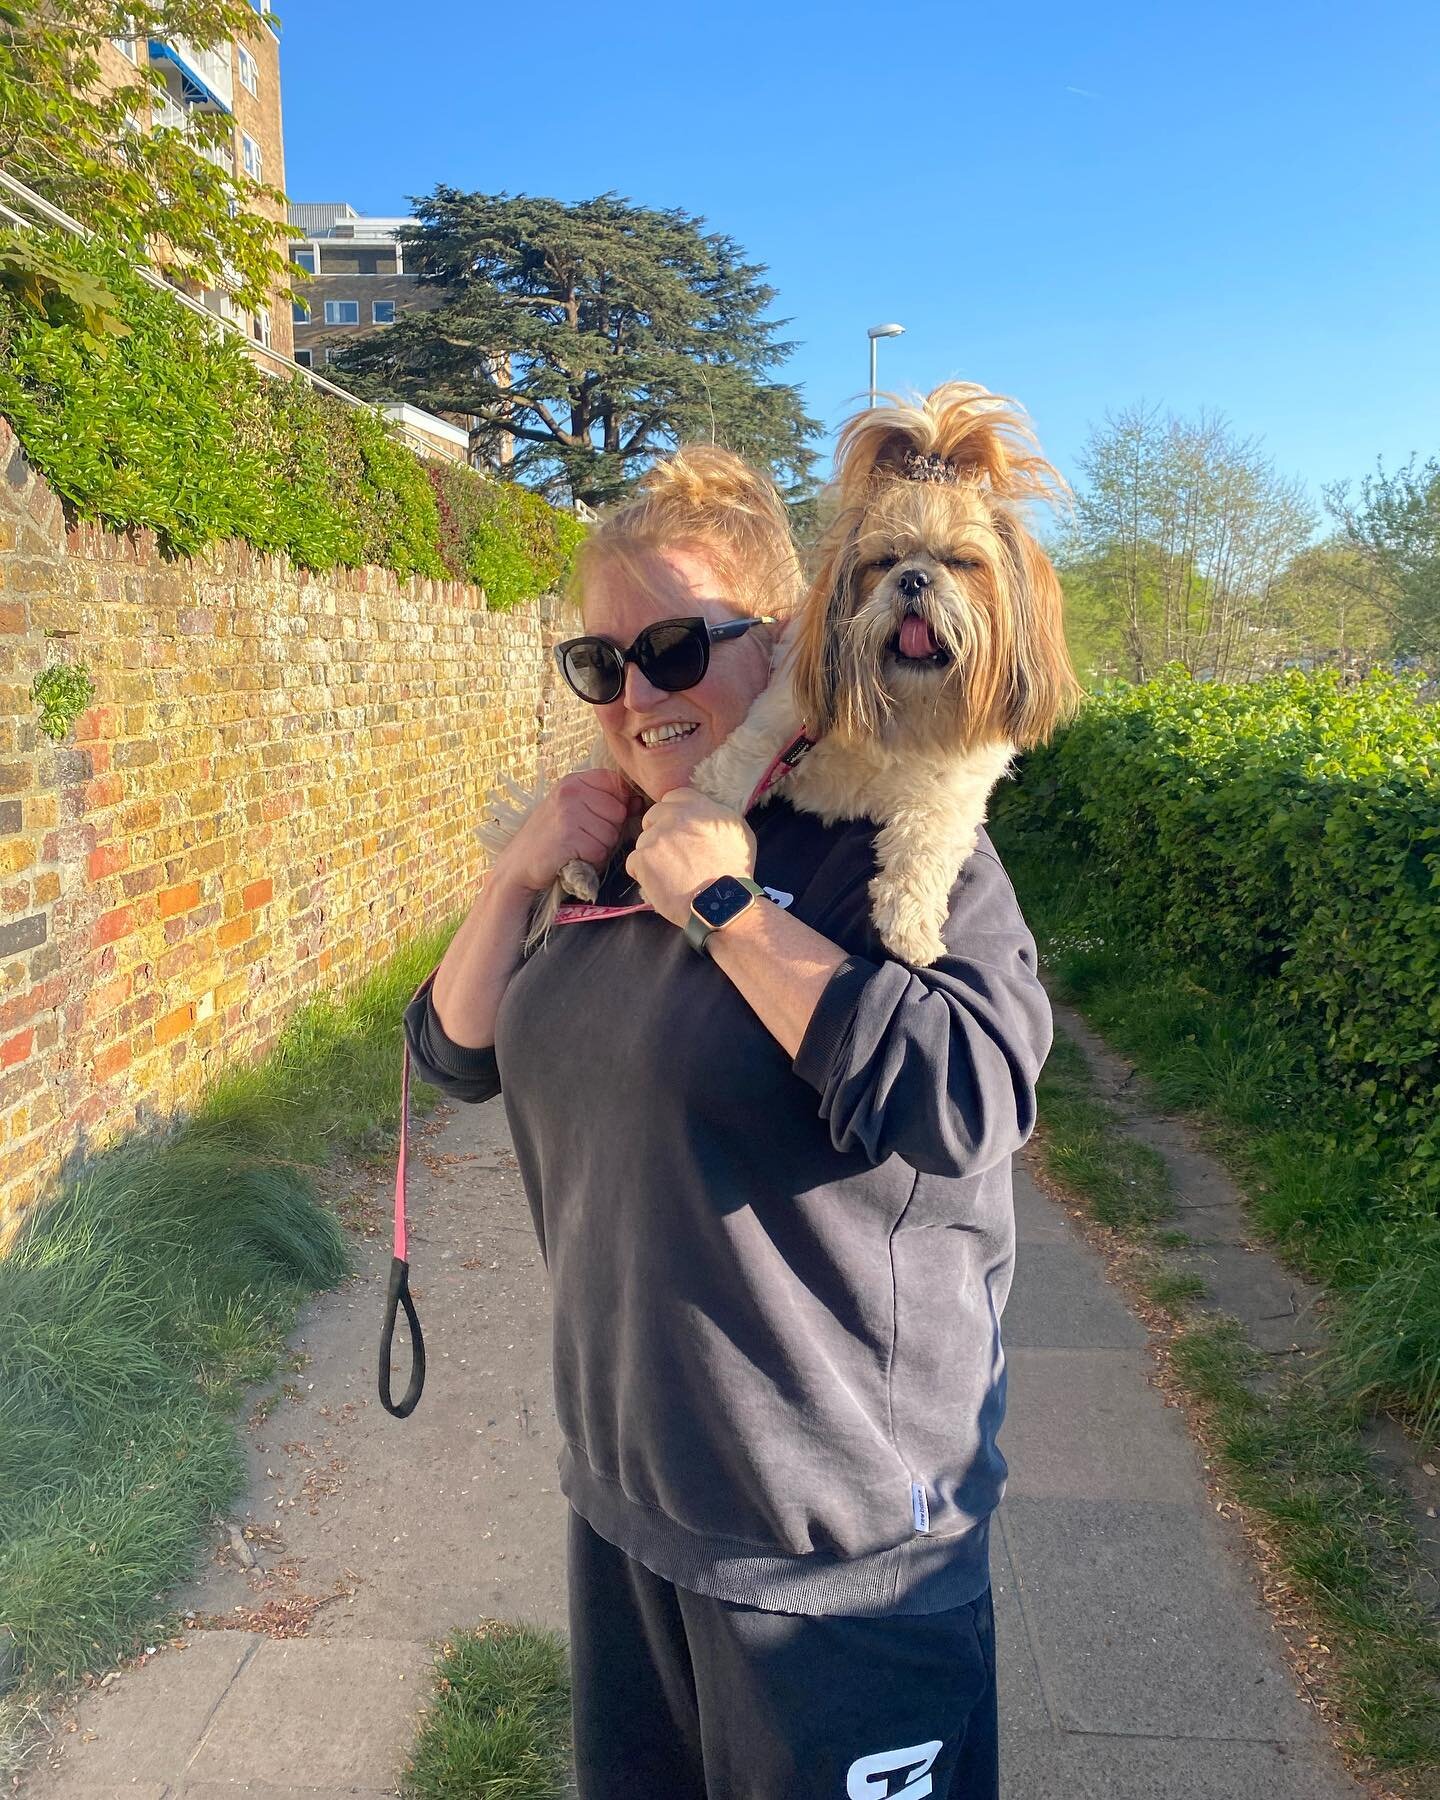 🐶After work walk with my little lamb 🐑

💗 She is a study in trust and love, cos it&rsquo;s all she&rsquo;s ever known! 💗

And being a total piece obvs&hellip;

#dogs #dogsofinstagram #dogslife #shihtzu #shihtzus #shihtzulovers #shihtzusofinstagra